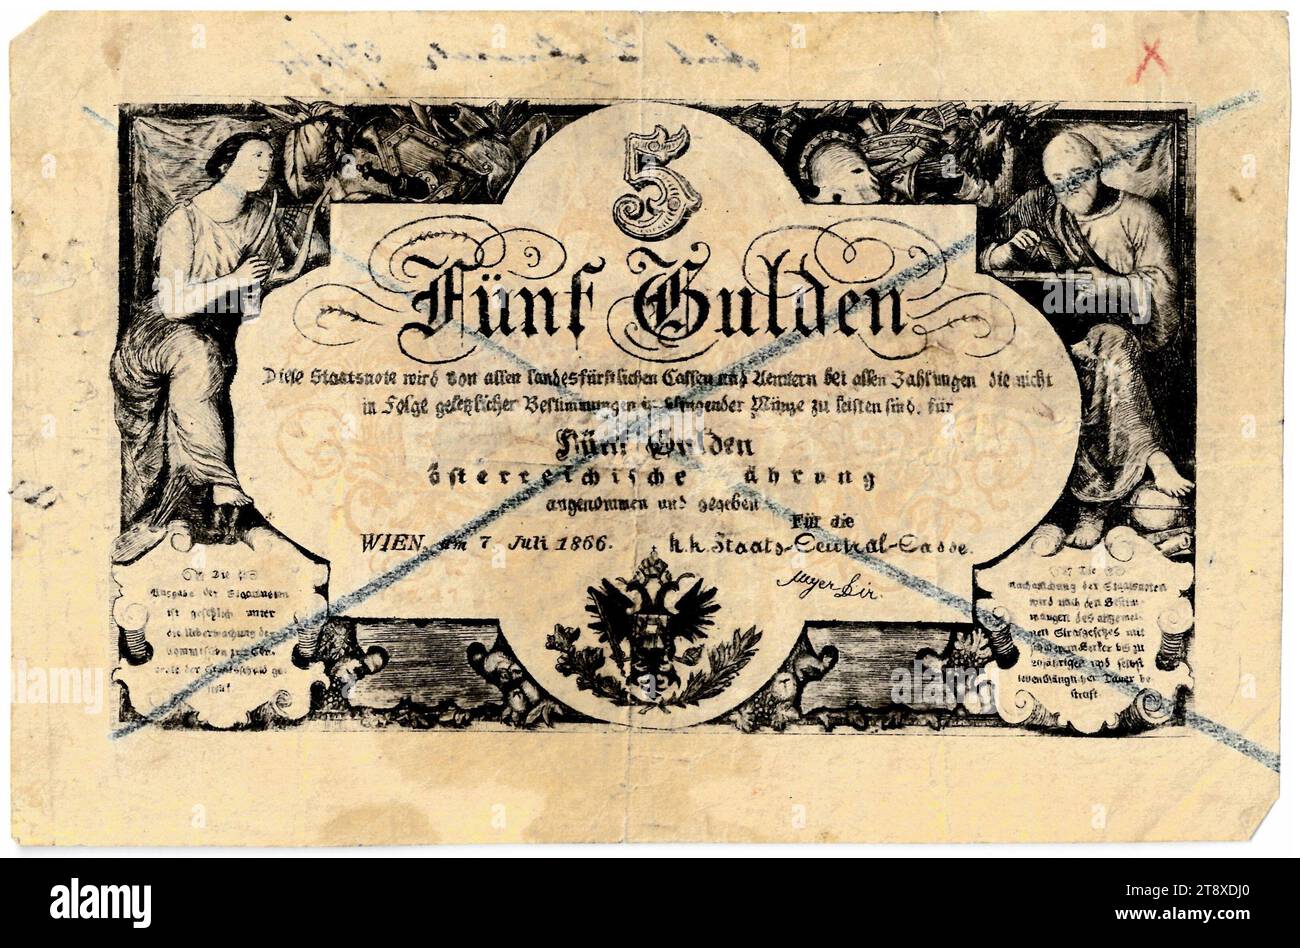 Staatsnote (Fälschung), 5 Gulden, K. K. Staats-Central-Casse, mint authority, Date after 07.07.1866, paper, printing, width 134 mm, height 88 mm, Mint, Wien, Mint territory, Österreich, Kaiserreich (1804-1867), Finance, counterfeit, forgery, coat of arms (as symbol of the state, etc.), bank-note, money, The Vienna Collection Stock Photo